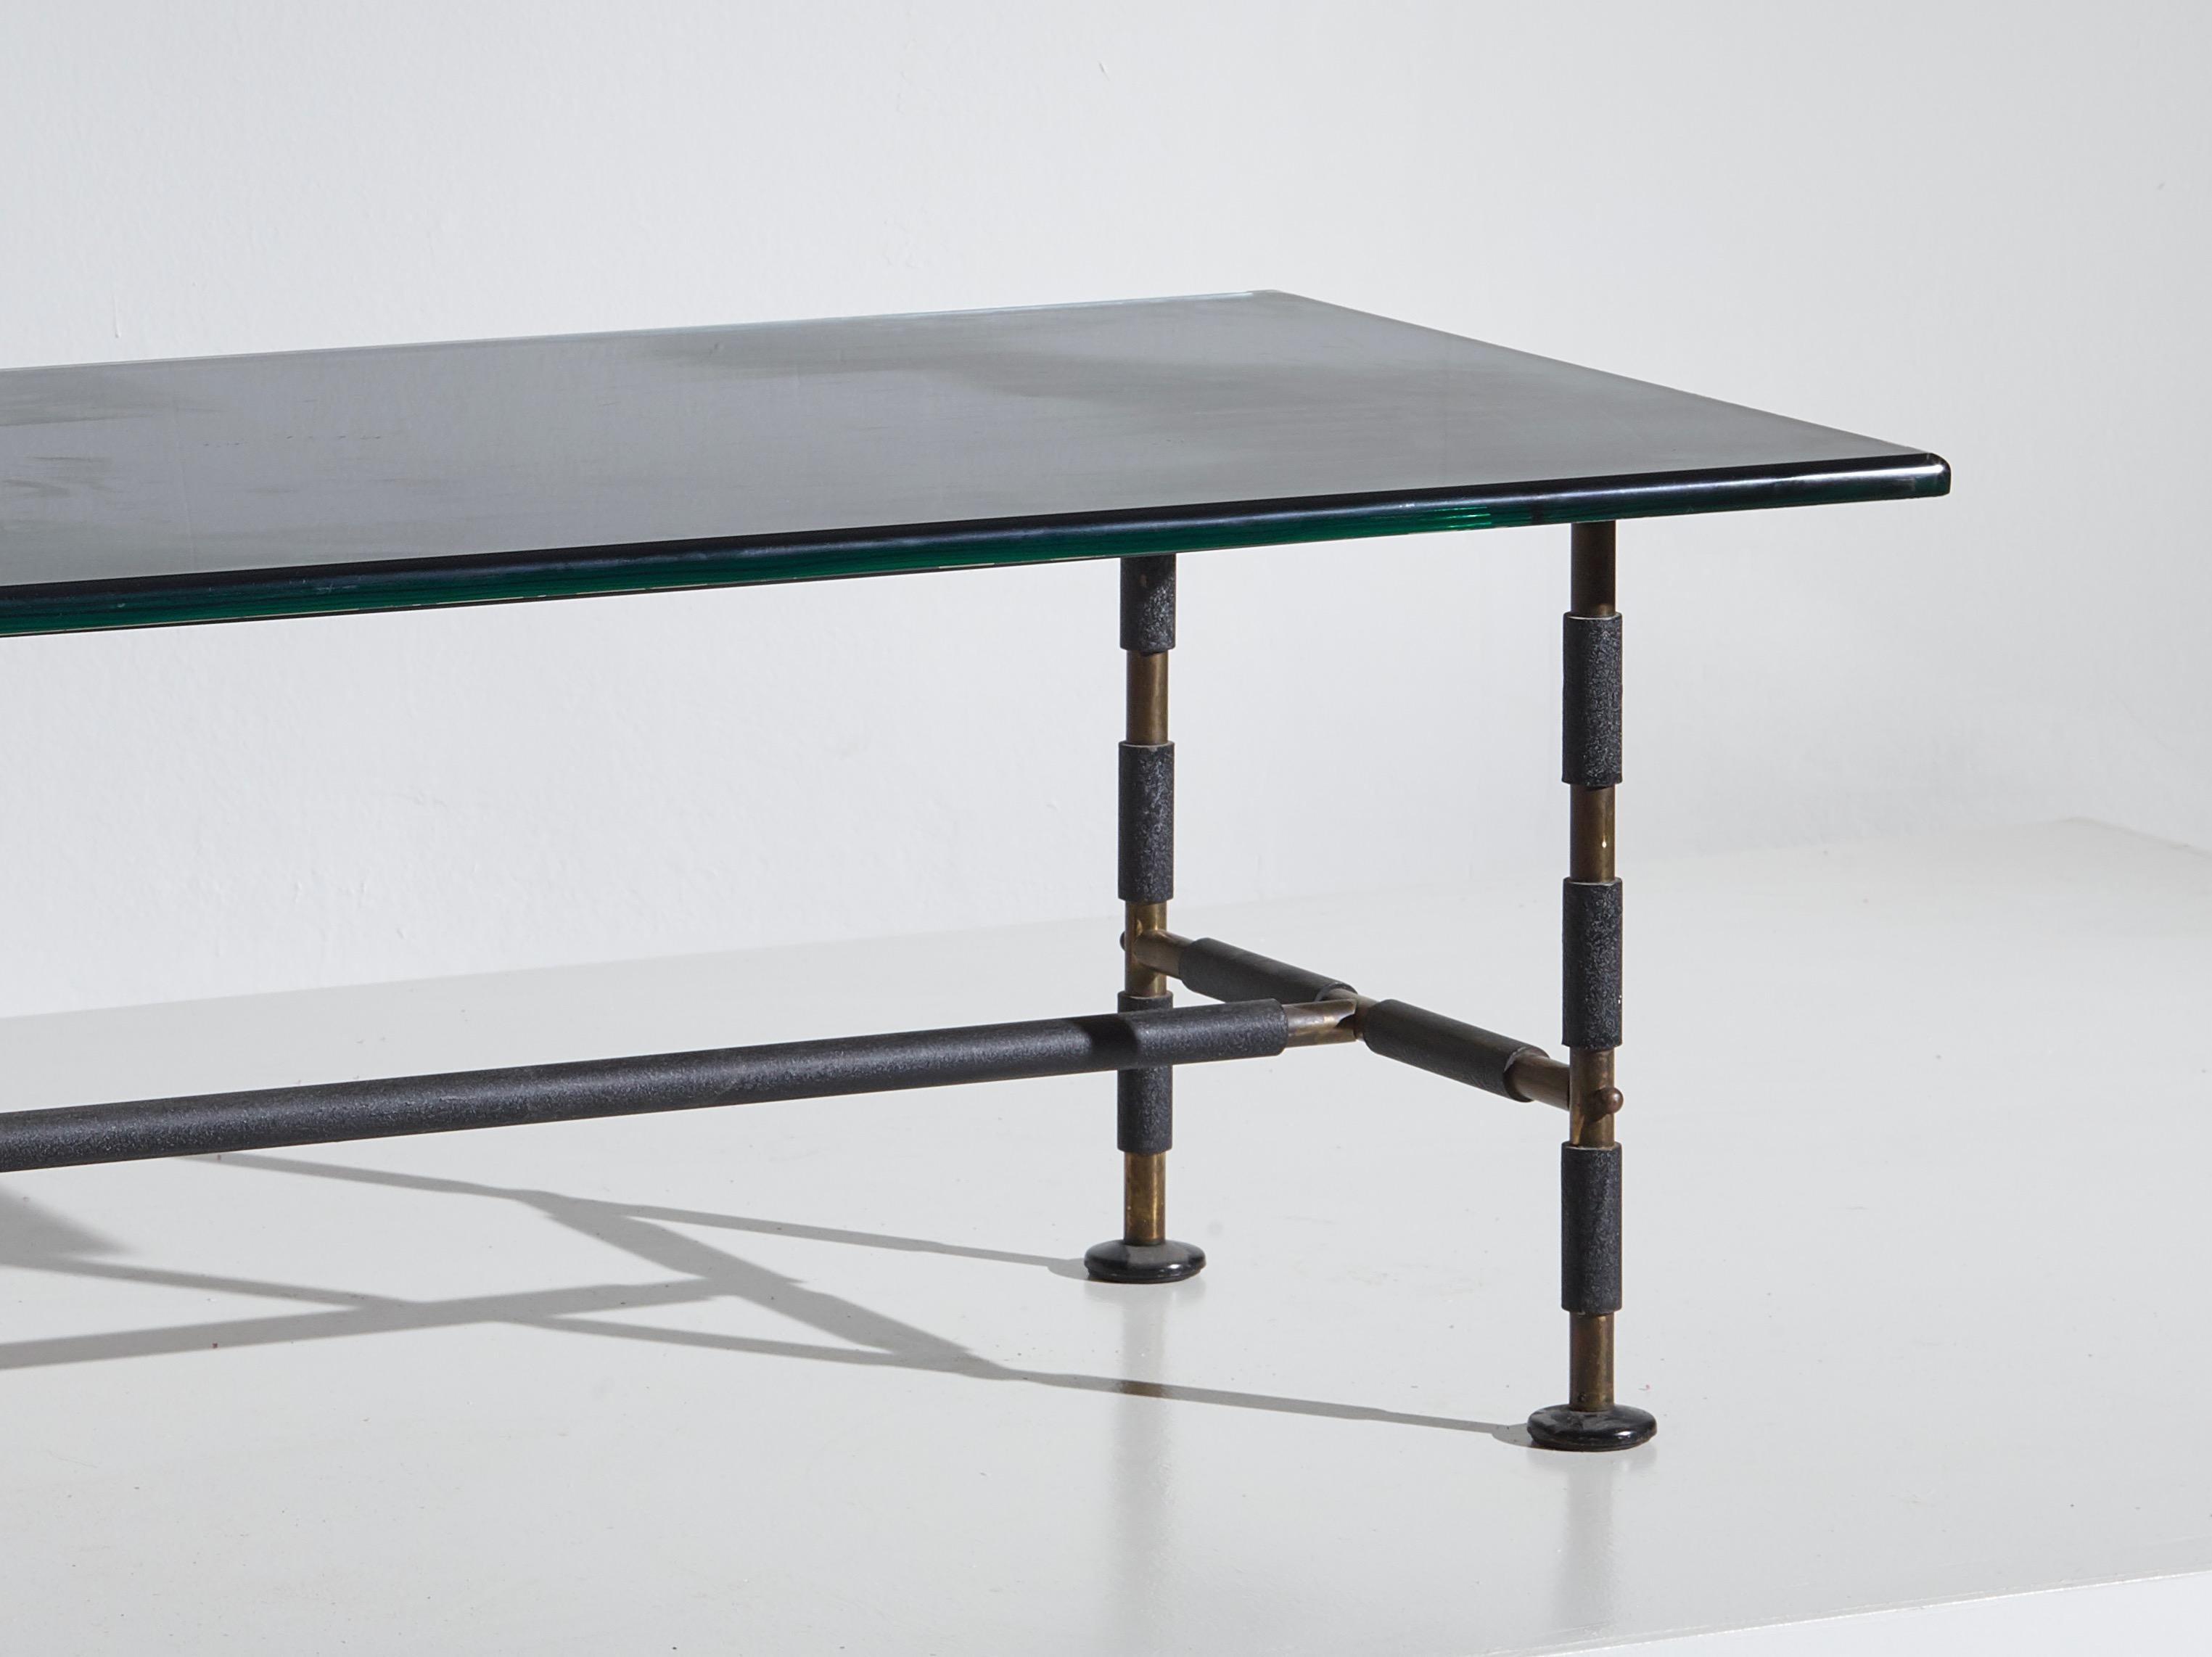 A beautiful occasional table mod 2661 designed and manufactured by Cristal Art in the 1960’s with a polished brass and lacquered metal structure and a mirrored glass top with rounded borders.

Dimensions: 102 x 60 x 42cm [DxWxH]

Condition: Good